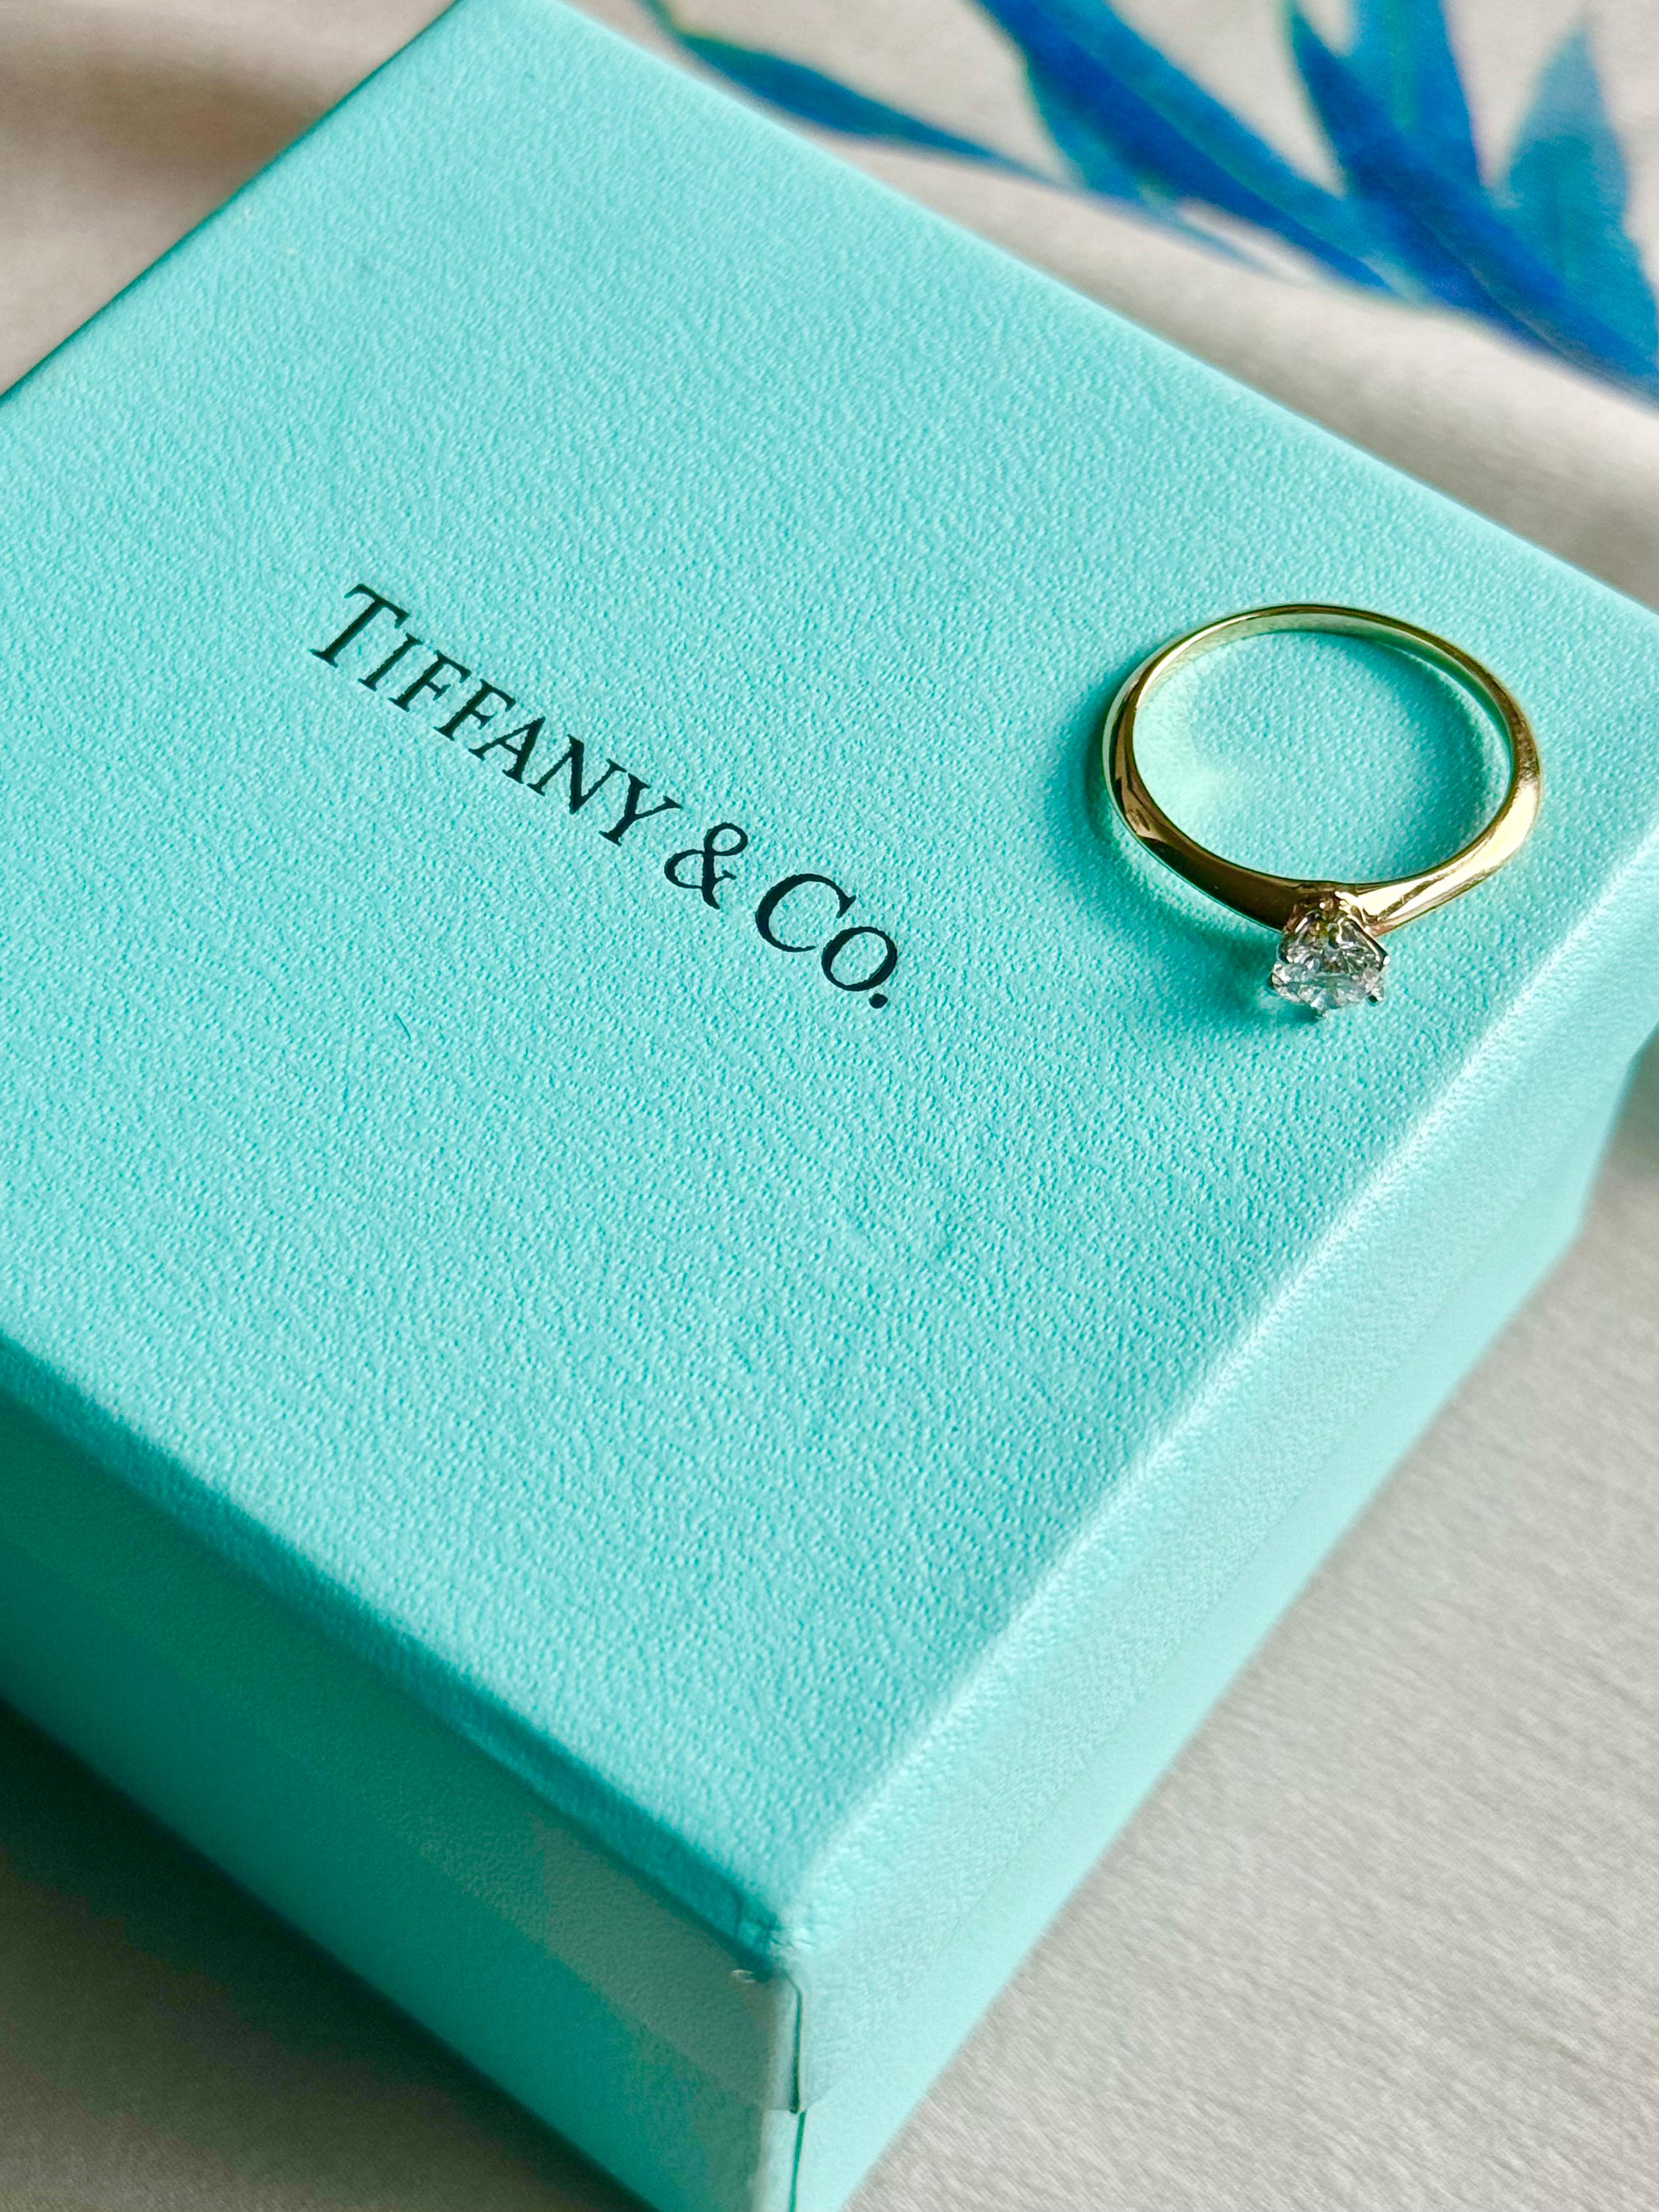 Tiffany & Co. 0.47 carat Diamond Solitaire Ring in 18K Gold For Sale 2